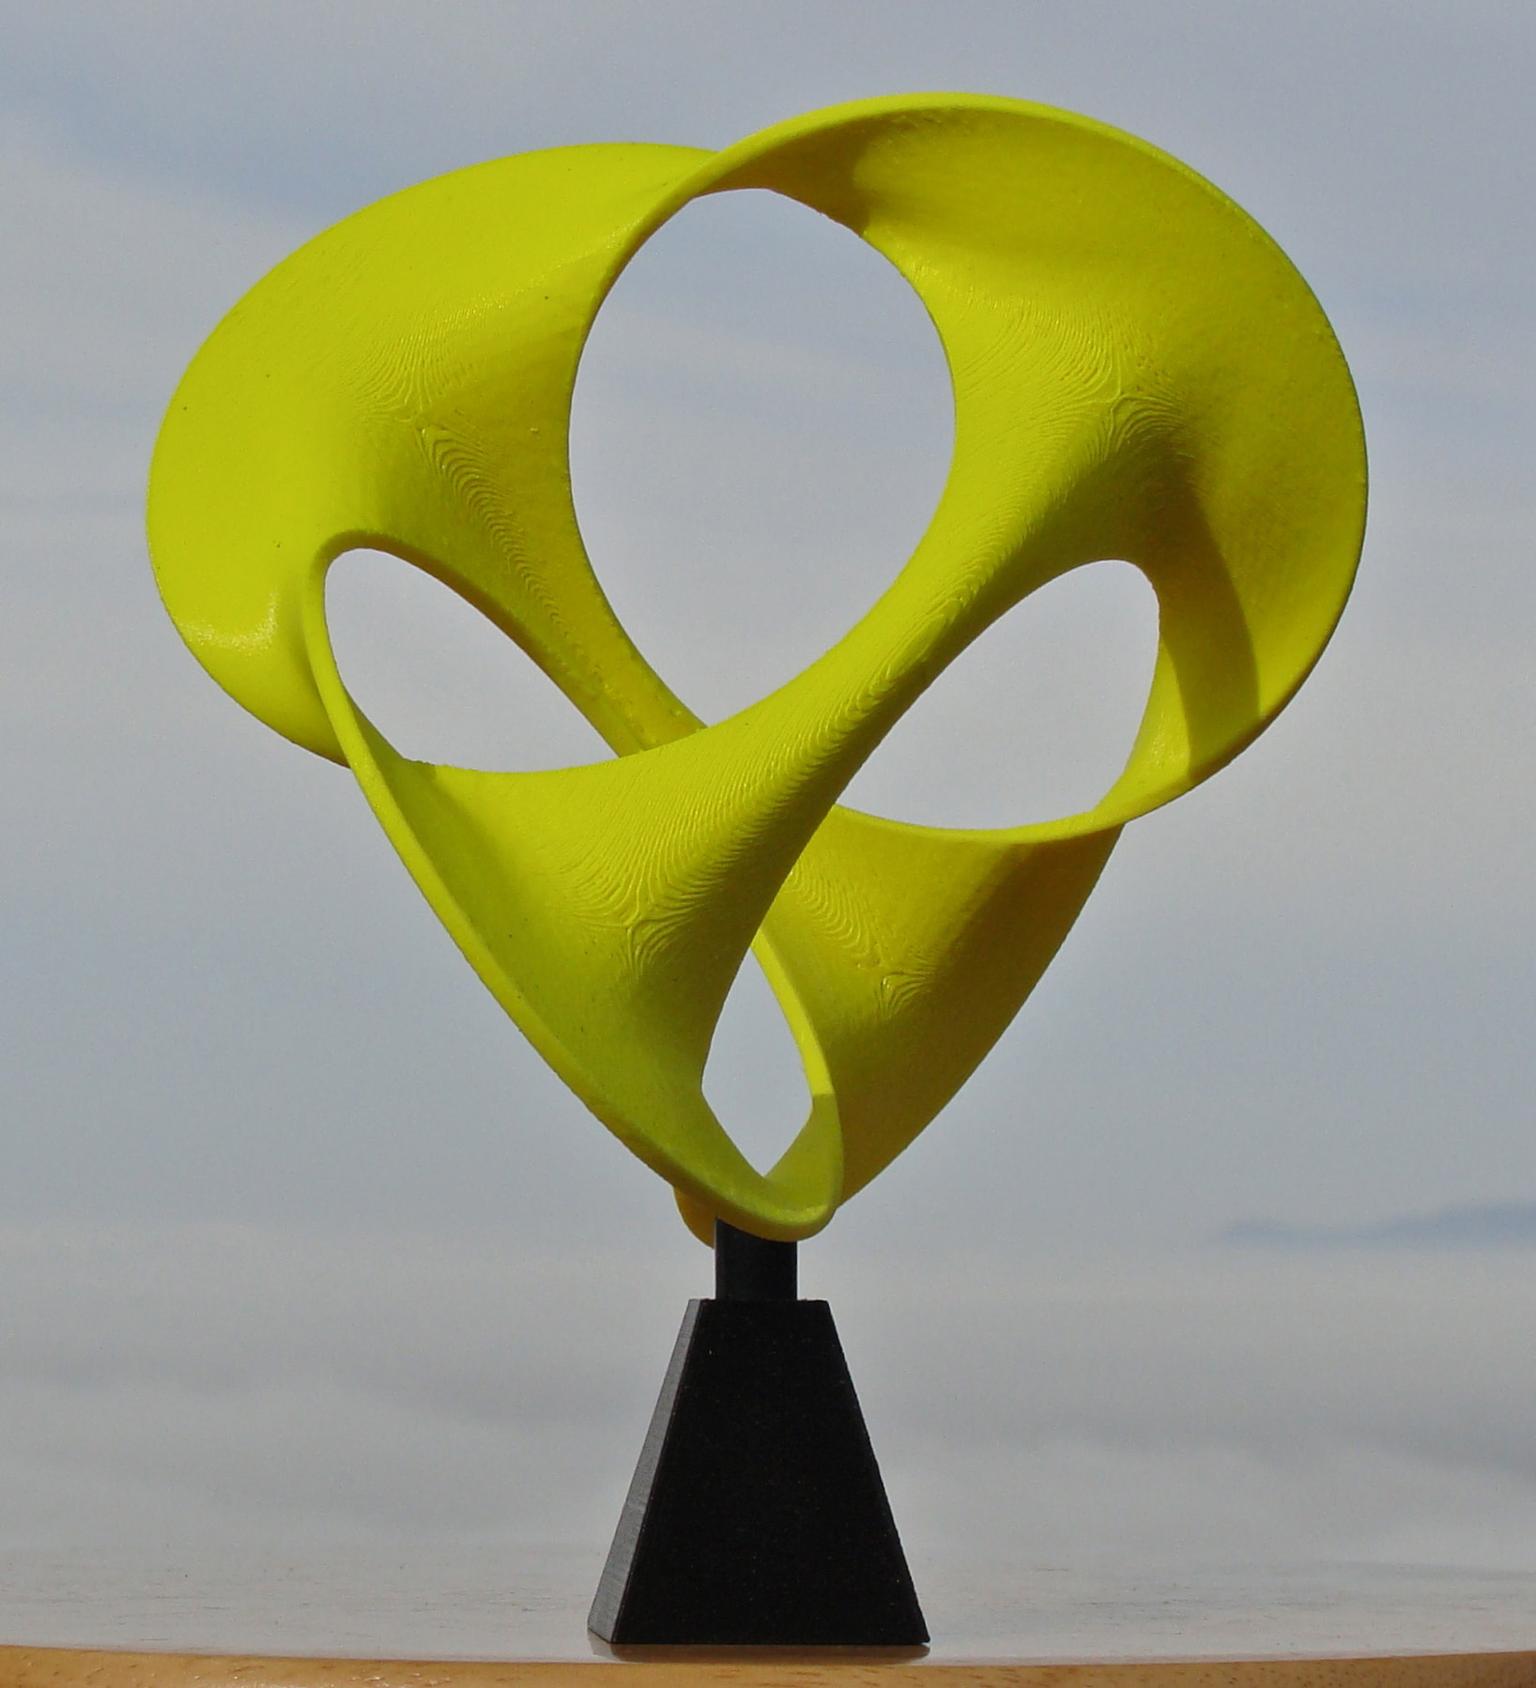 Image for entry 'Emulation of Charles Perry’s “Tetra” sculpture'